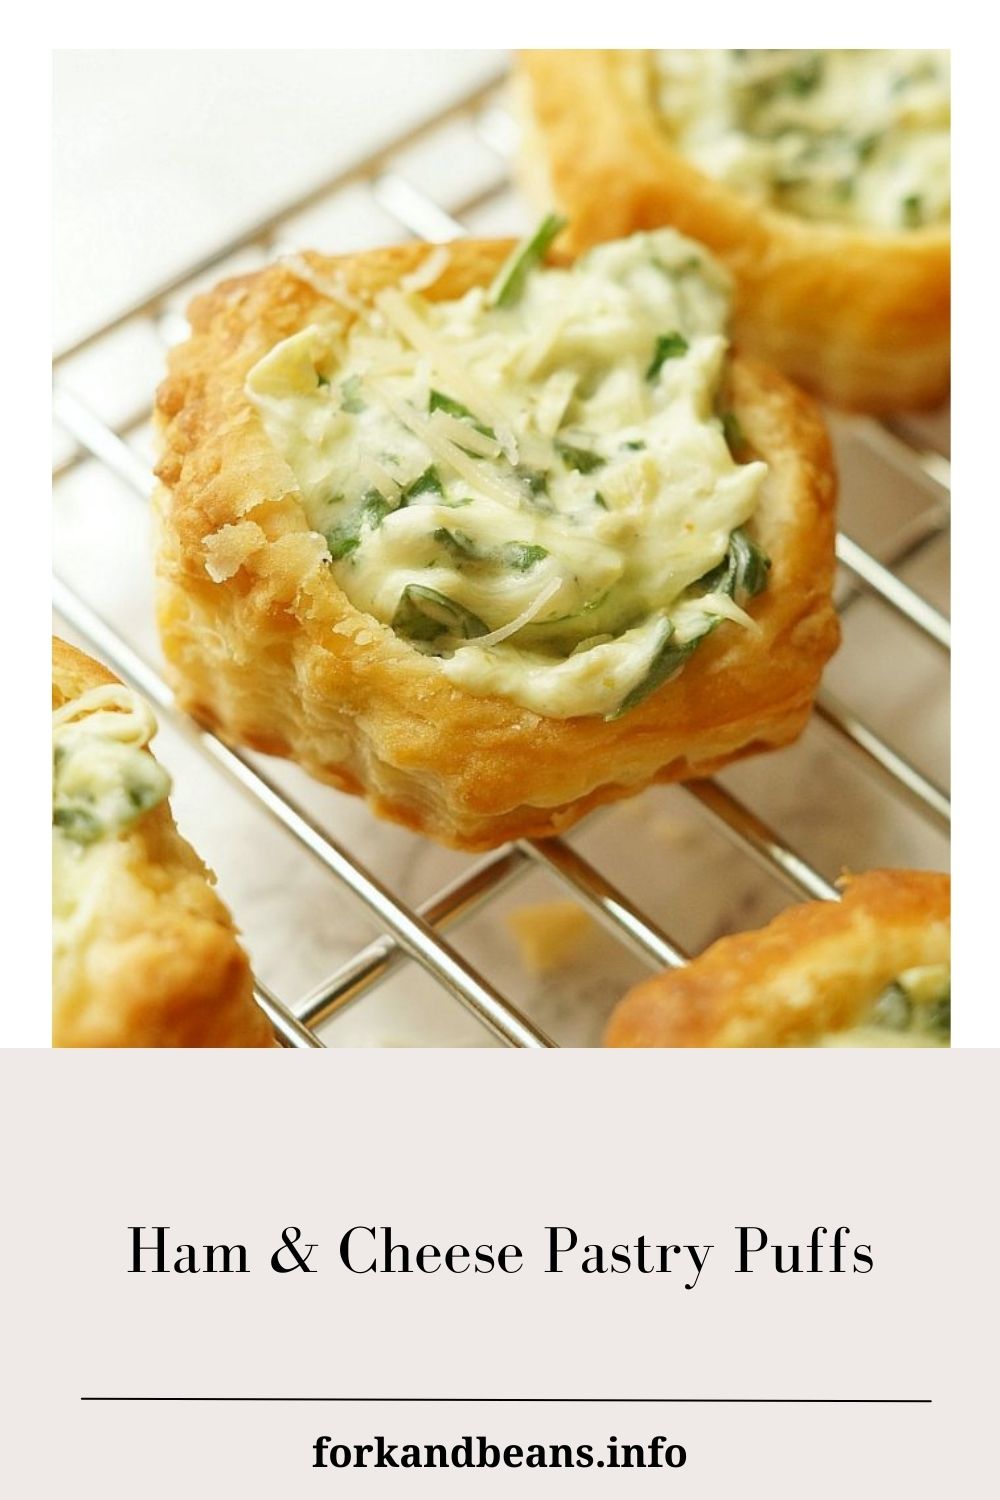 Puff pastry cups with spinach and artichokes